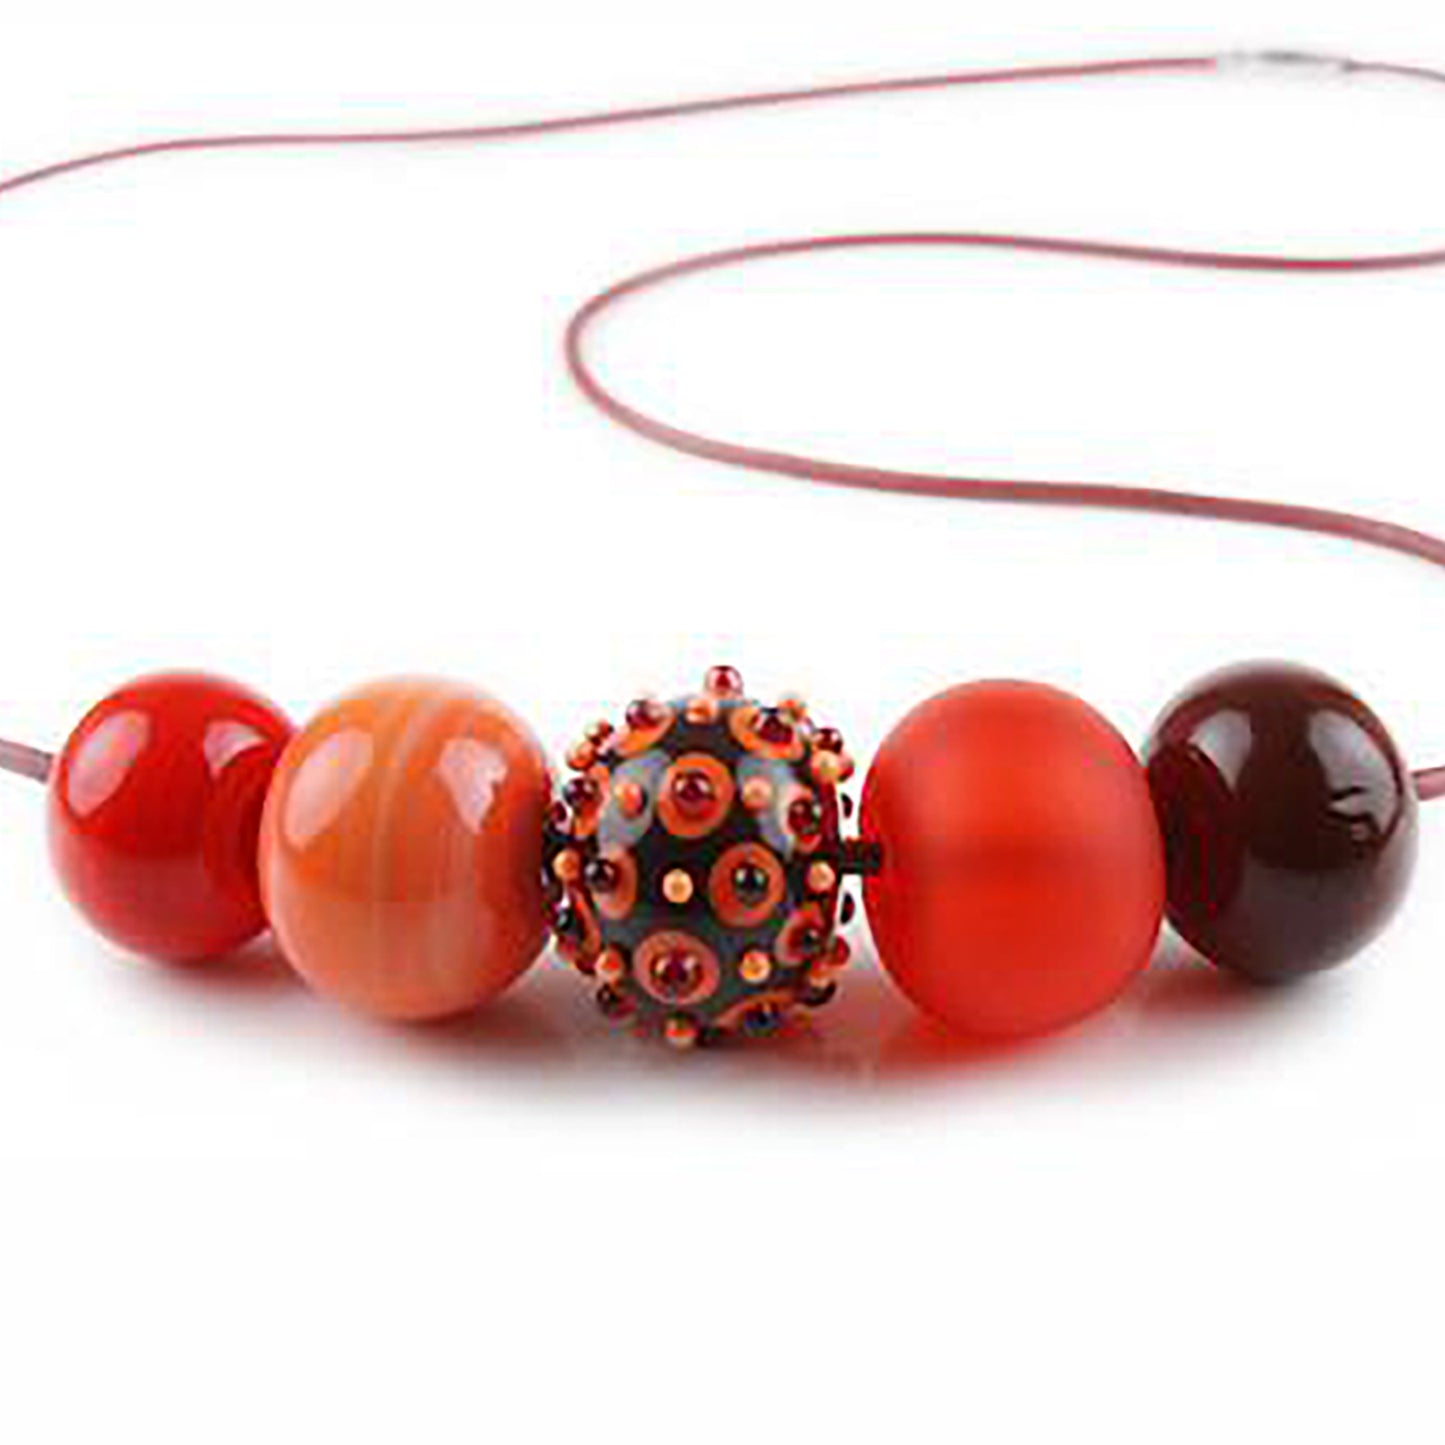 5 bubble bead necklace - reds with focal bead